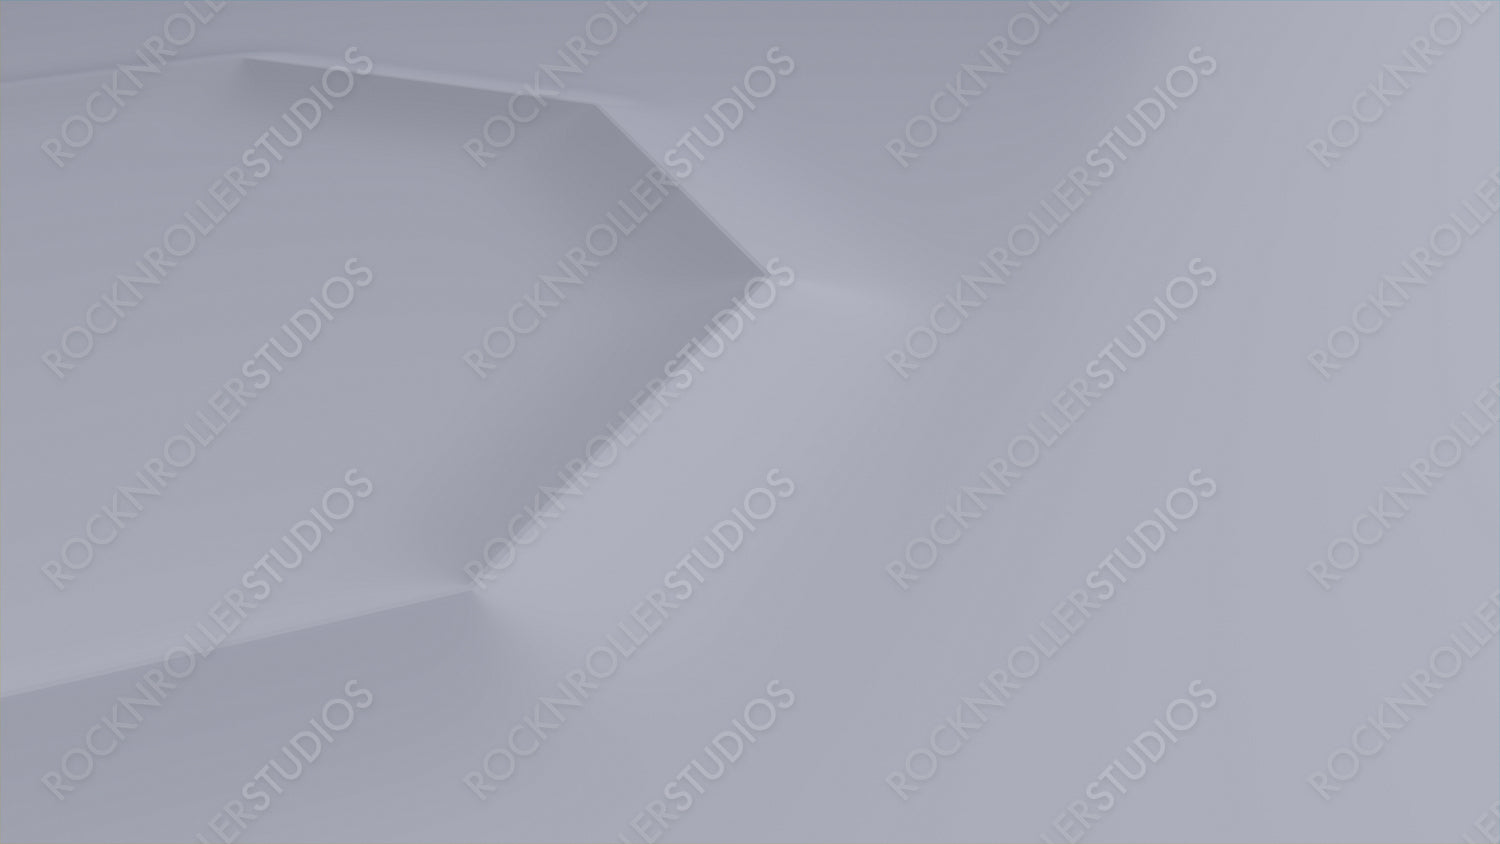 Minimalist Background with Embossed Octagon. White Surface with Raised 3D Shape. 3D Render.